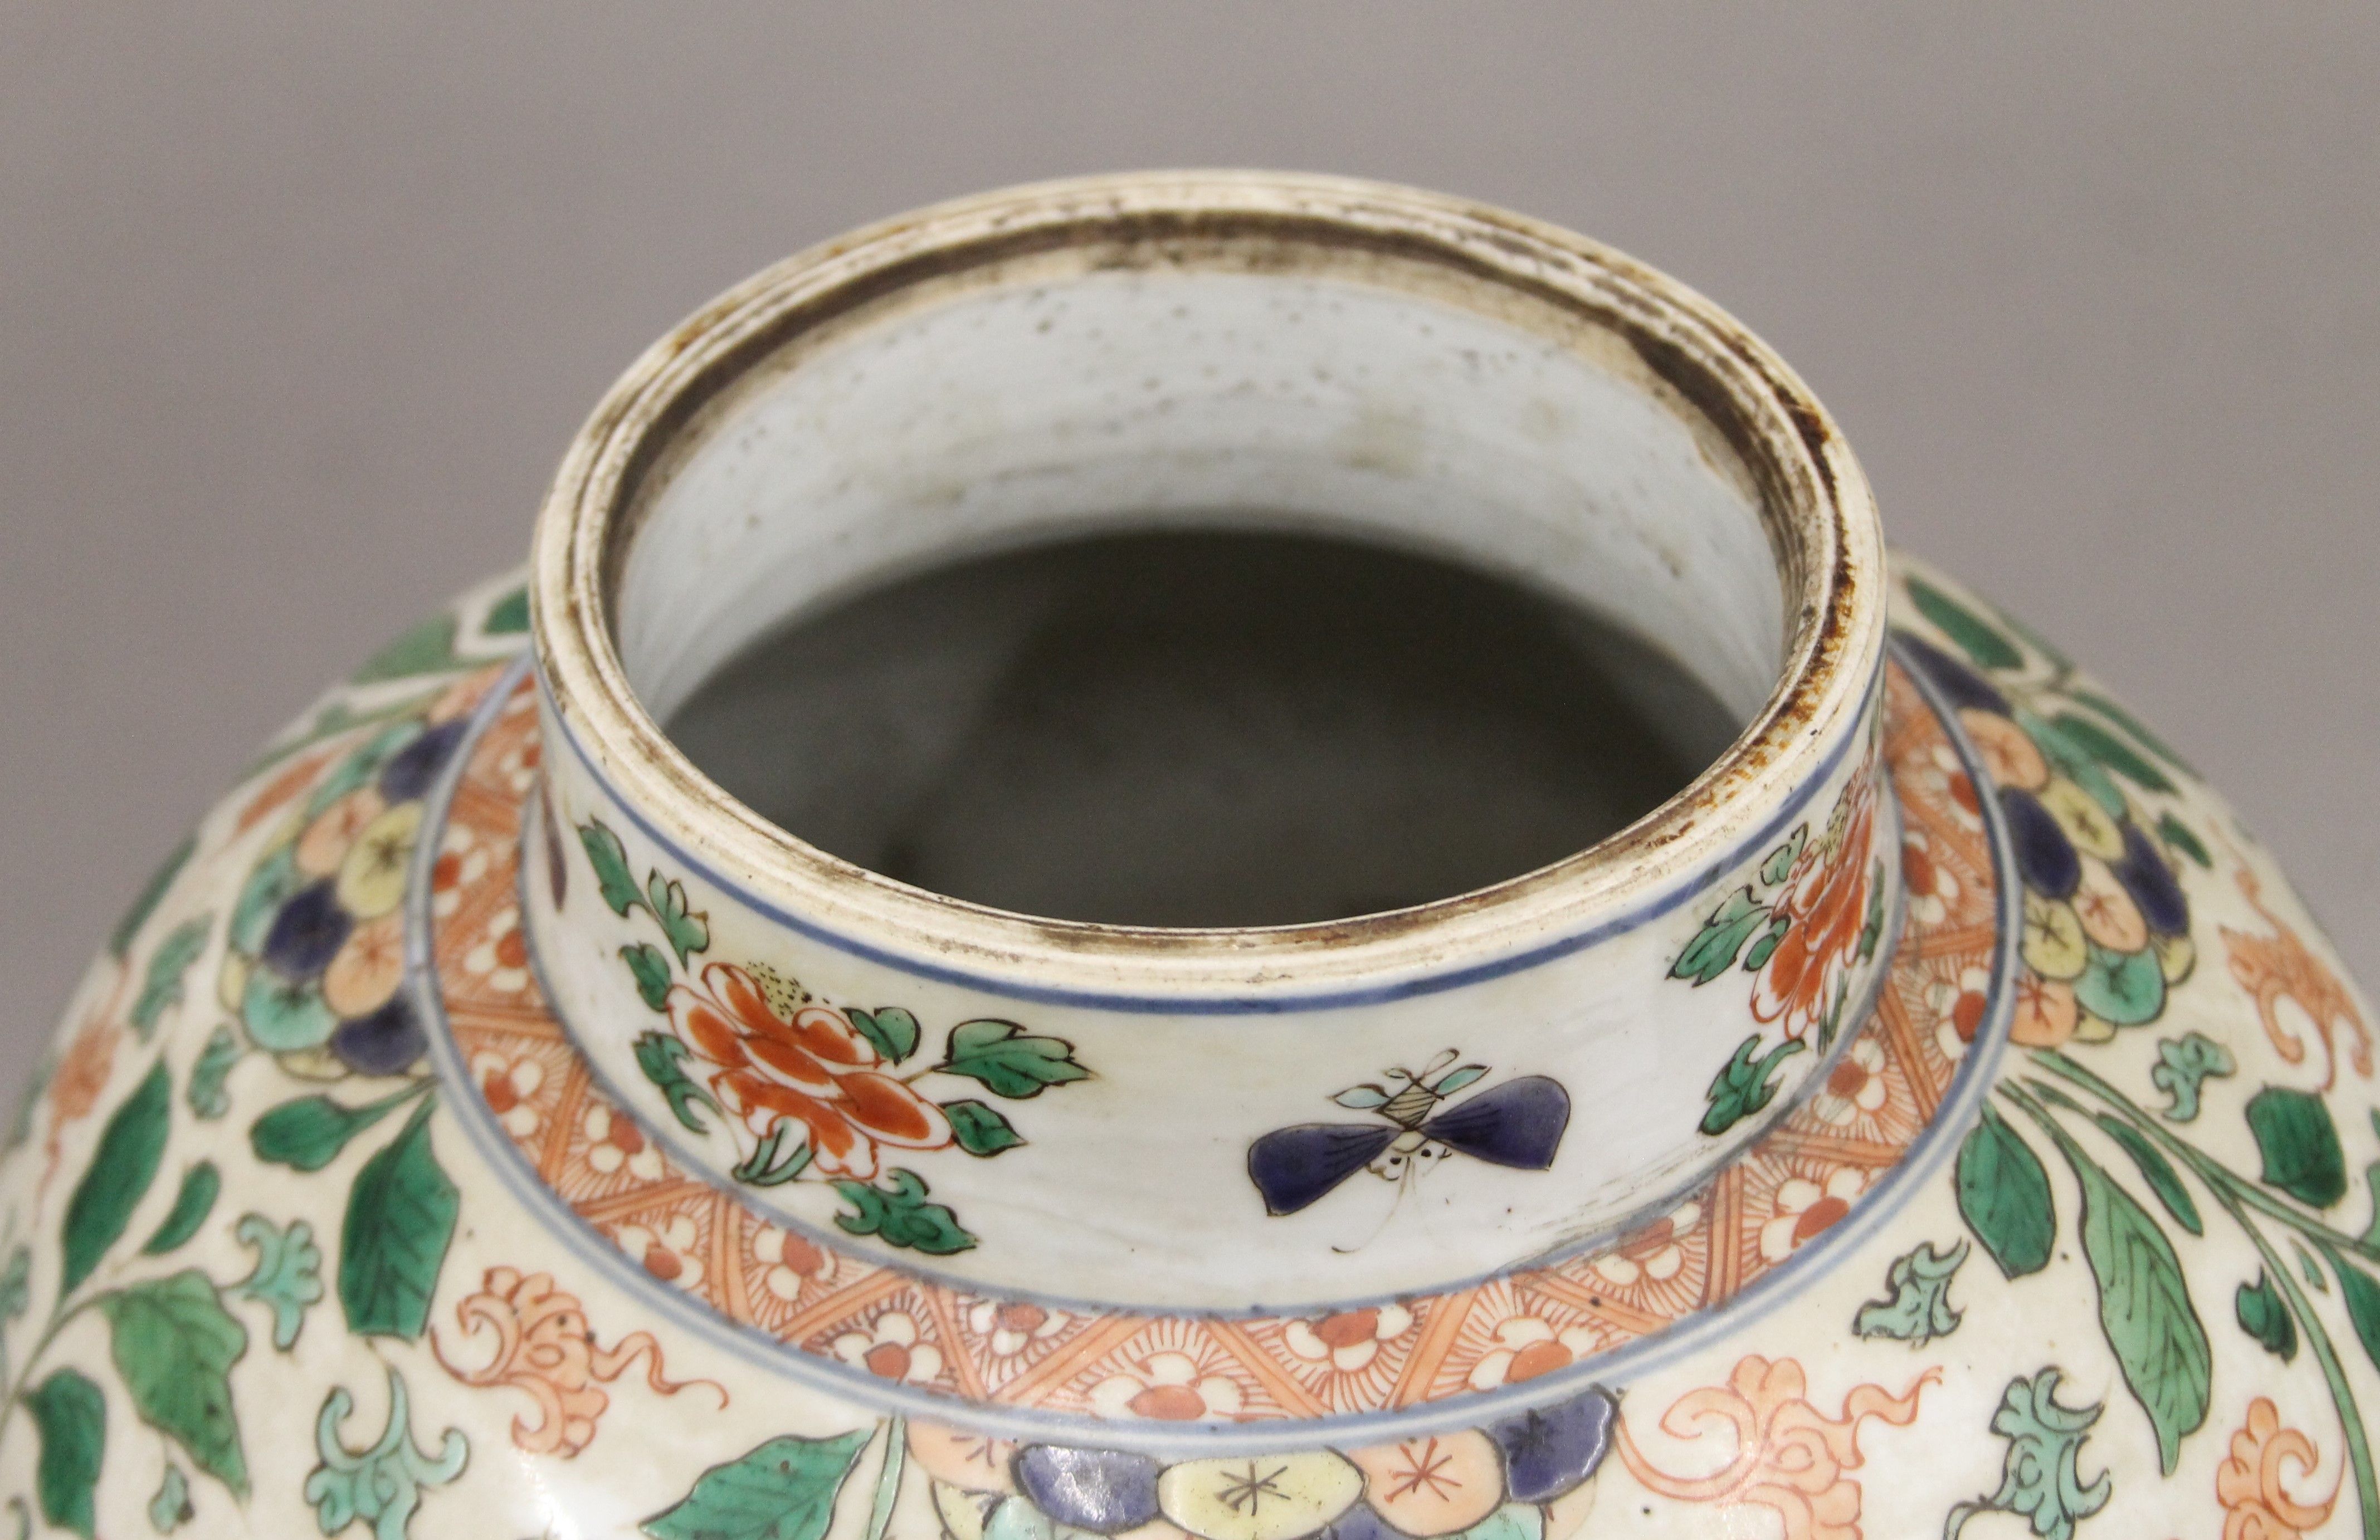 A 18th/19th century Chinese porcelain vase with pierced wooden lid and carved wooden stand. - Image 4 of 8